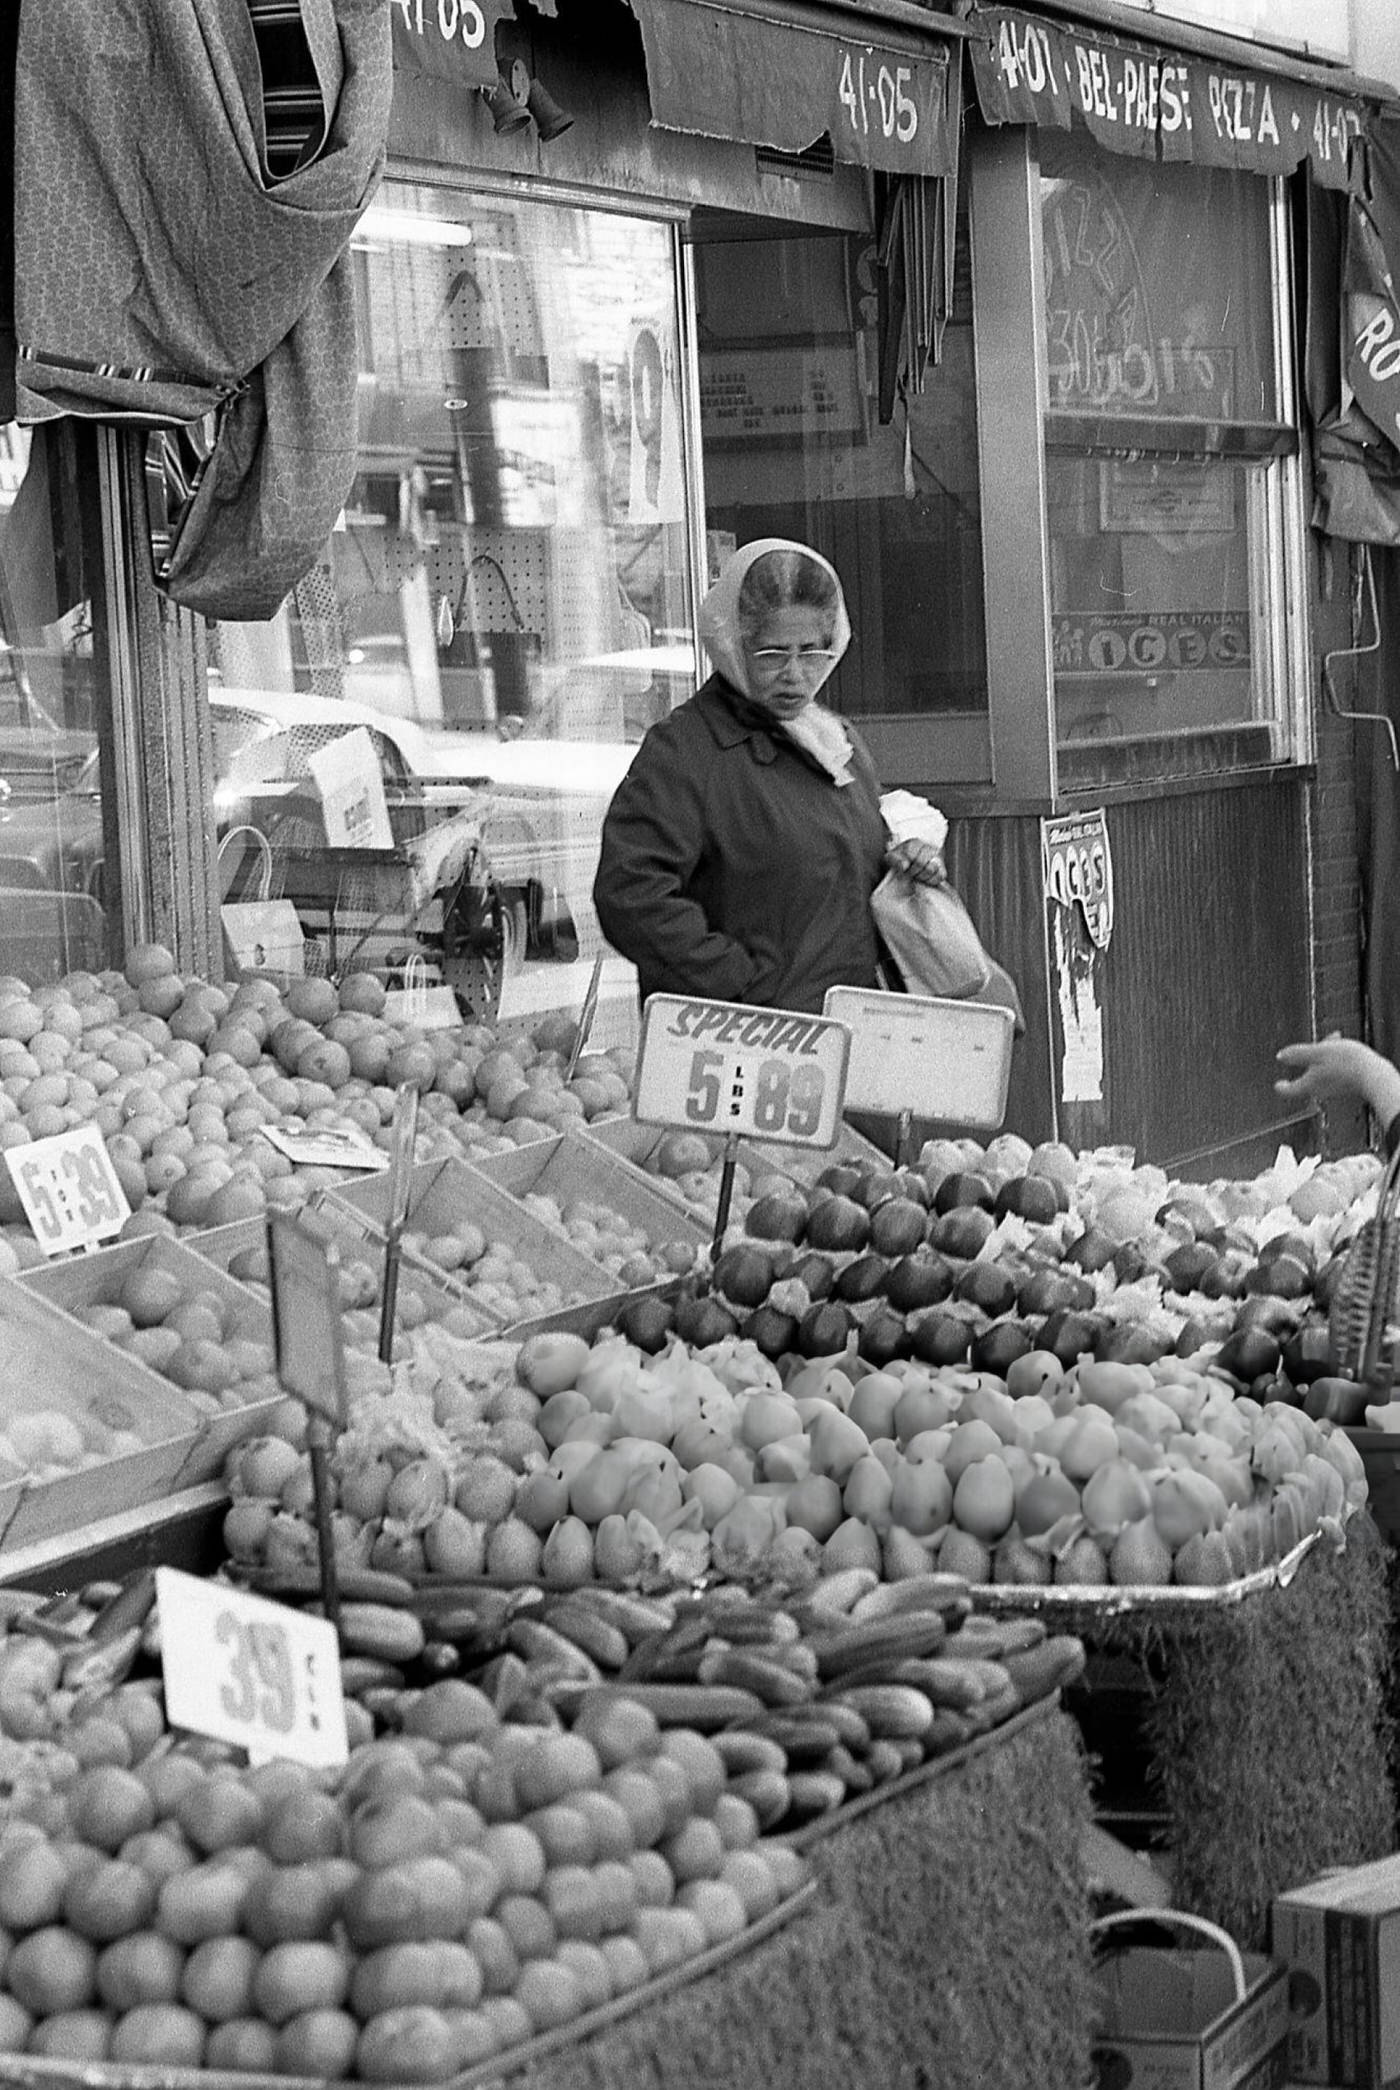 A Woman Exiting A Produce Market On National Street In Corona, Queens, 1970.